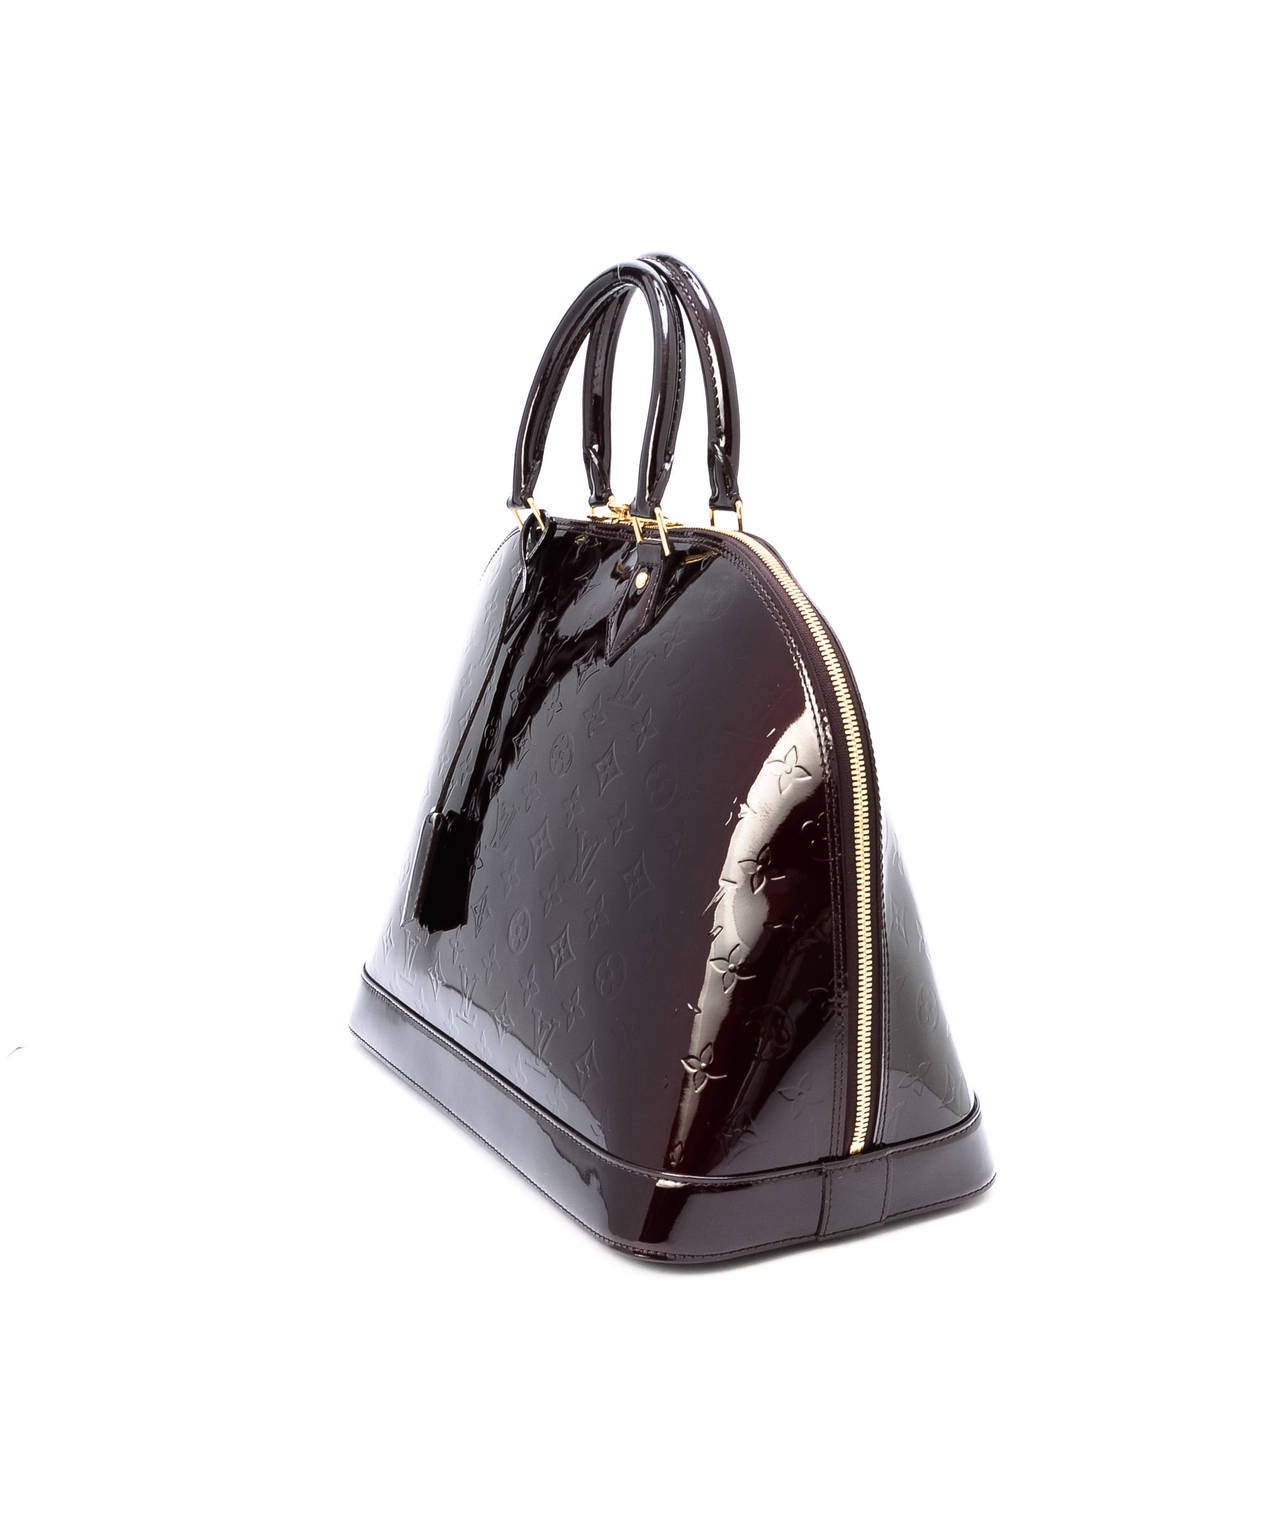 Amarante Vernis leather 
Due to its vintage nature, there are minor scratches on the leather trims around the bottom of the bag 
Comes with original clochette, keys, lock and dust bag 
The measurements of the items are 38 cm by 28 cm by 18 cm,